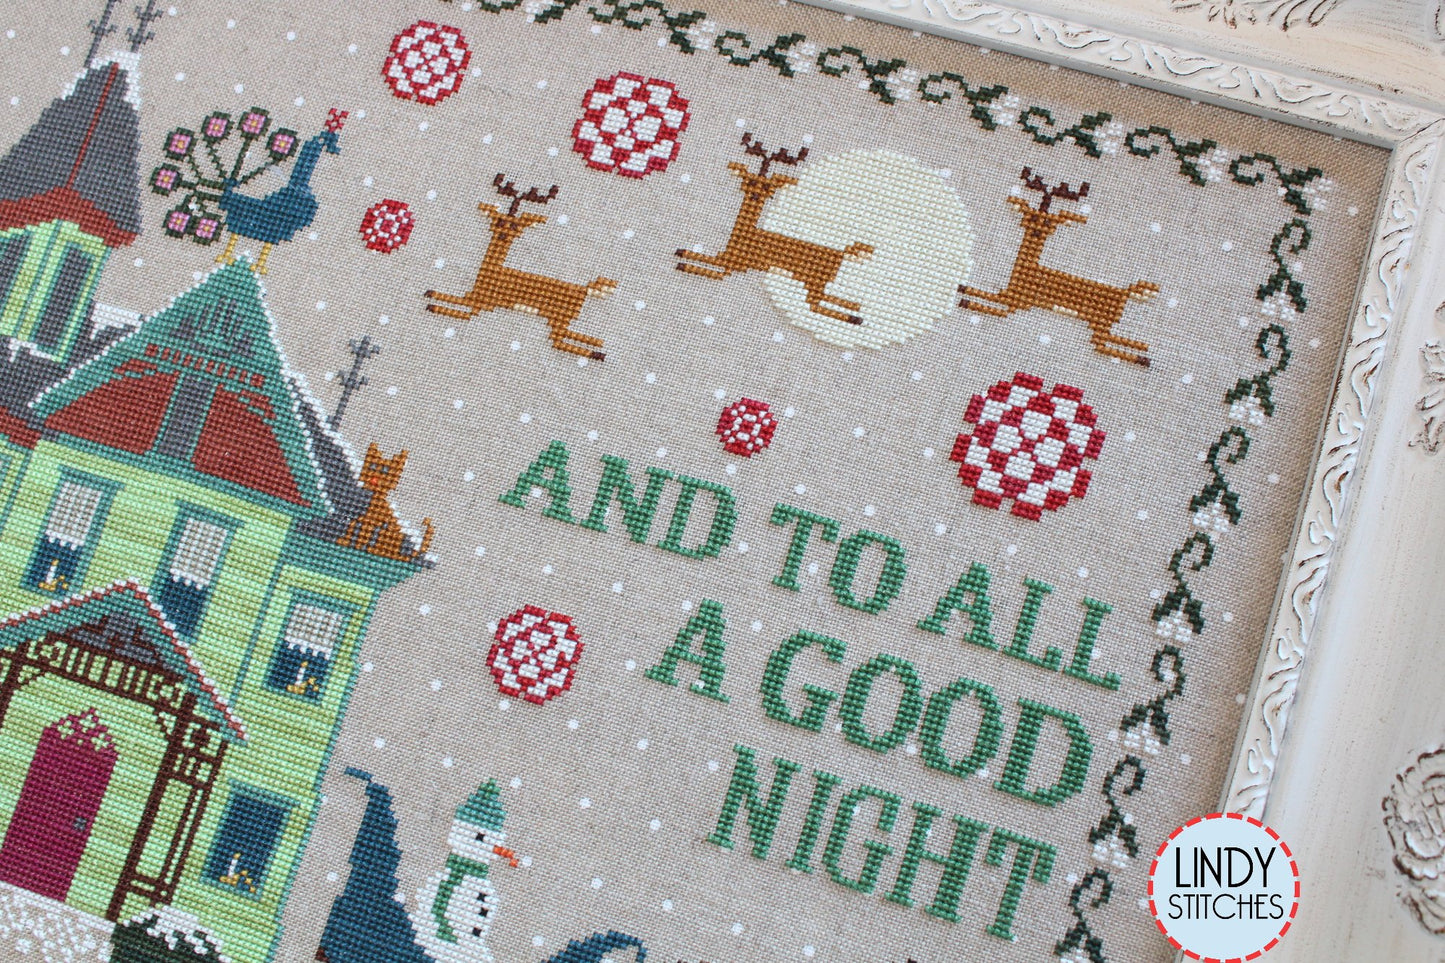 And To All a Good Night Cross Stitch Pattern Lindy Stitches